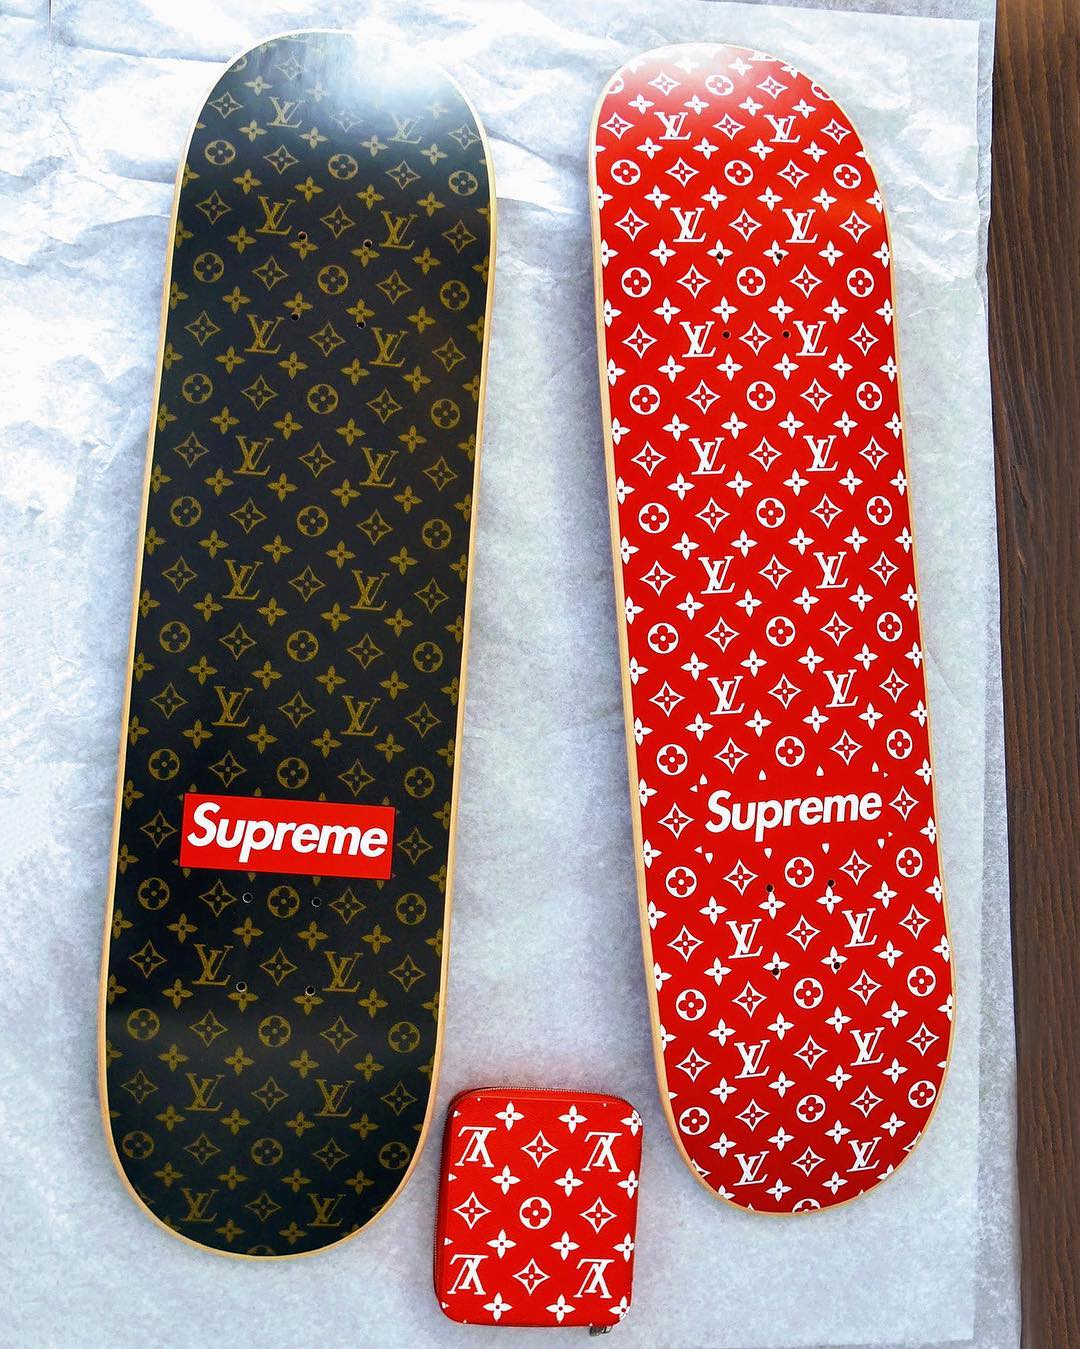 HYPEBEAST on X: A Supreme x @louisvuitton skate deck will also be